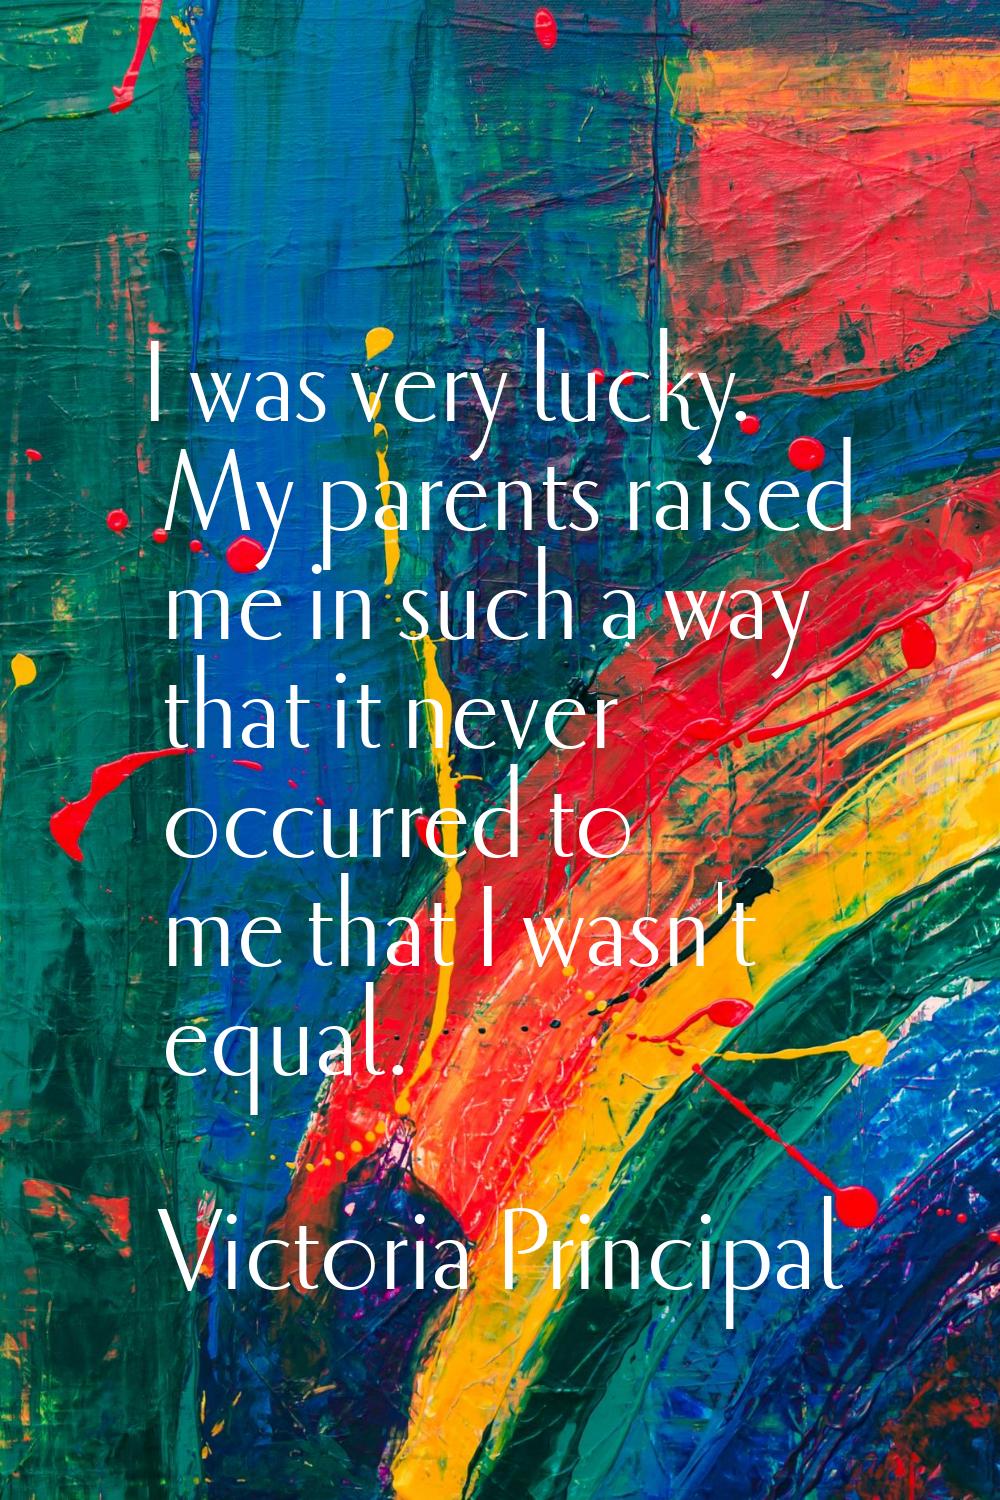 I was very lucky. My parents raised me in such a way that it never occurred to me that I wasn't equ